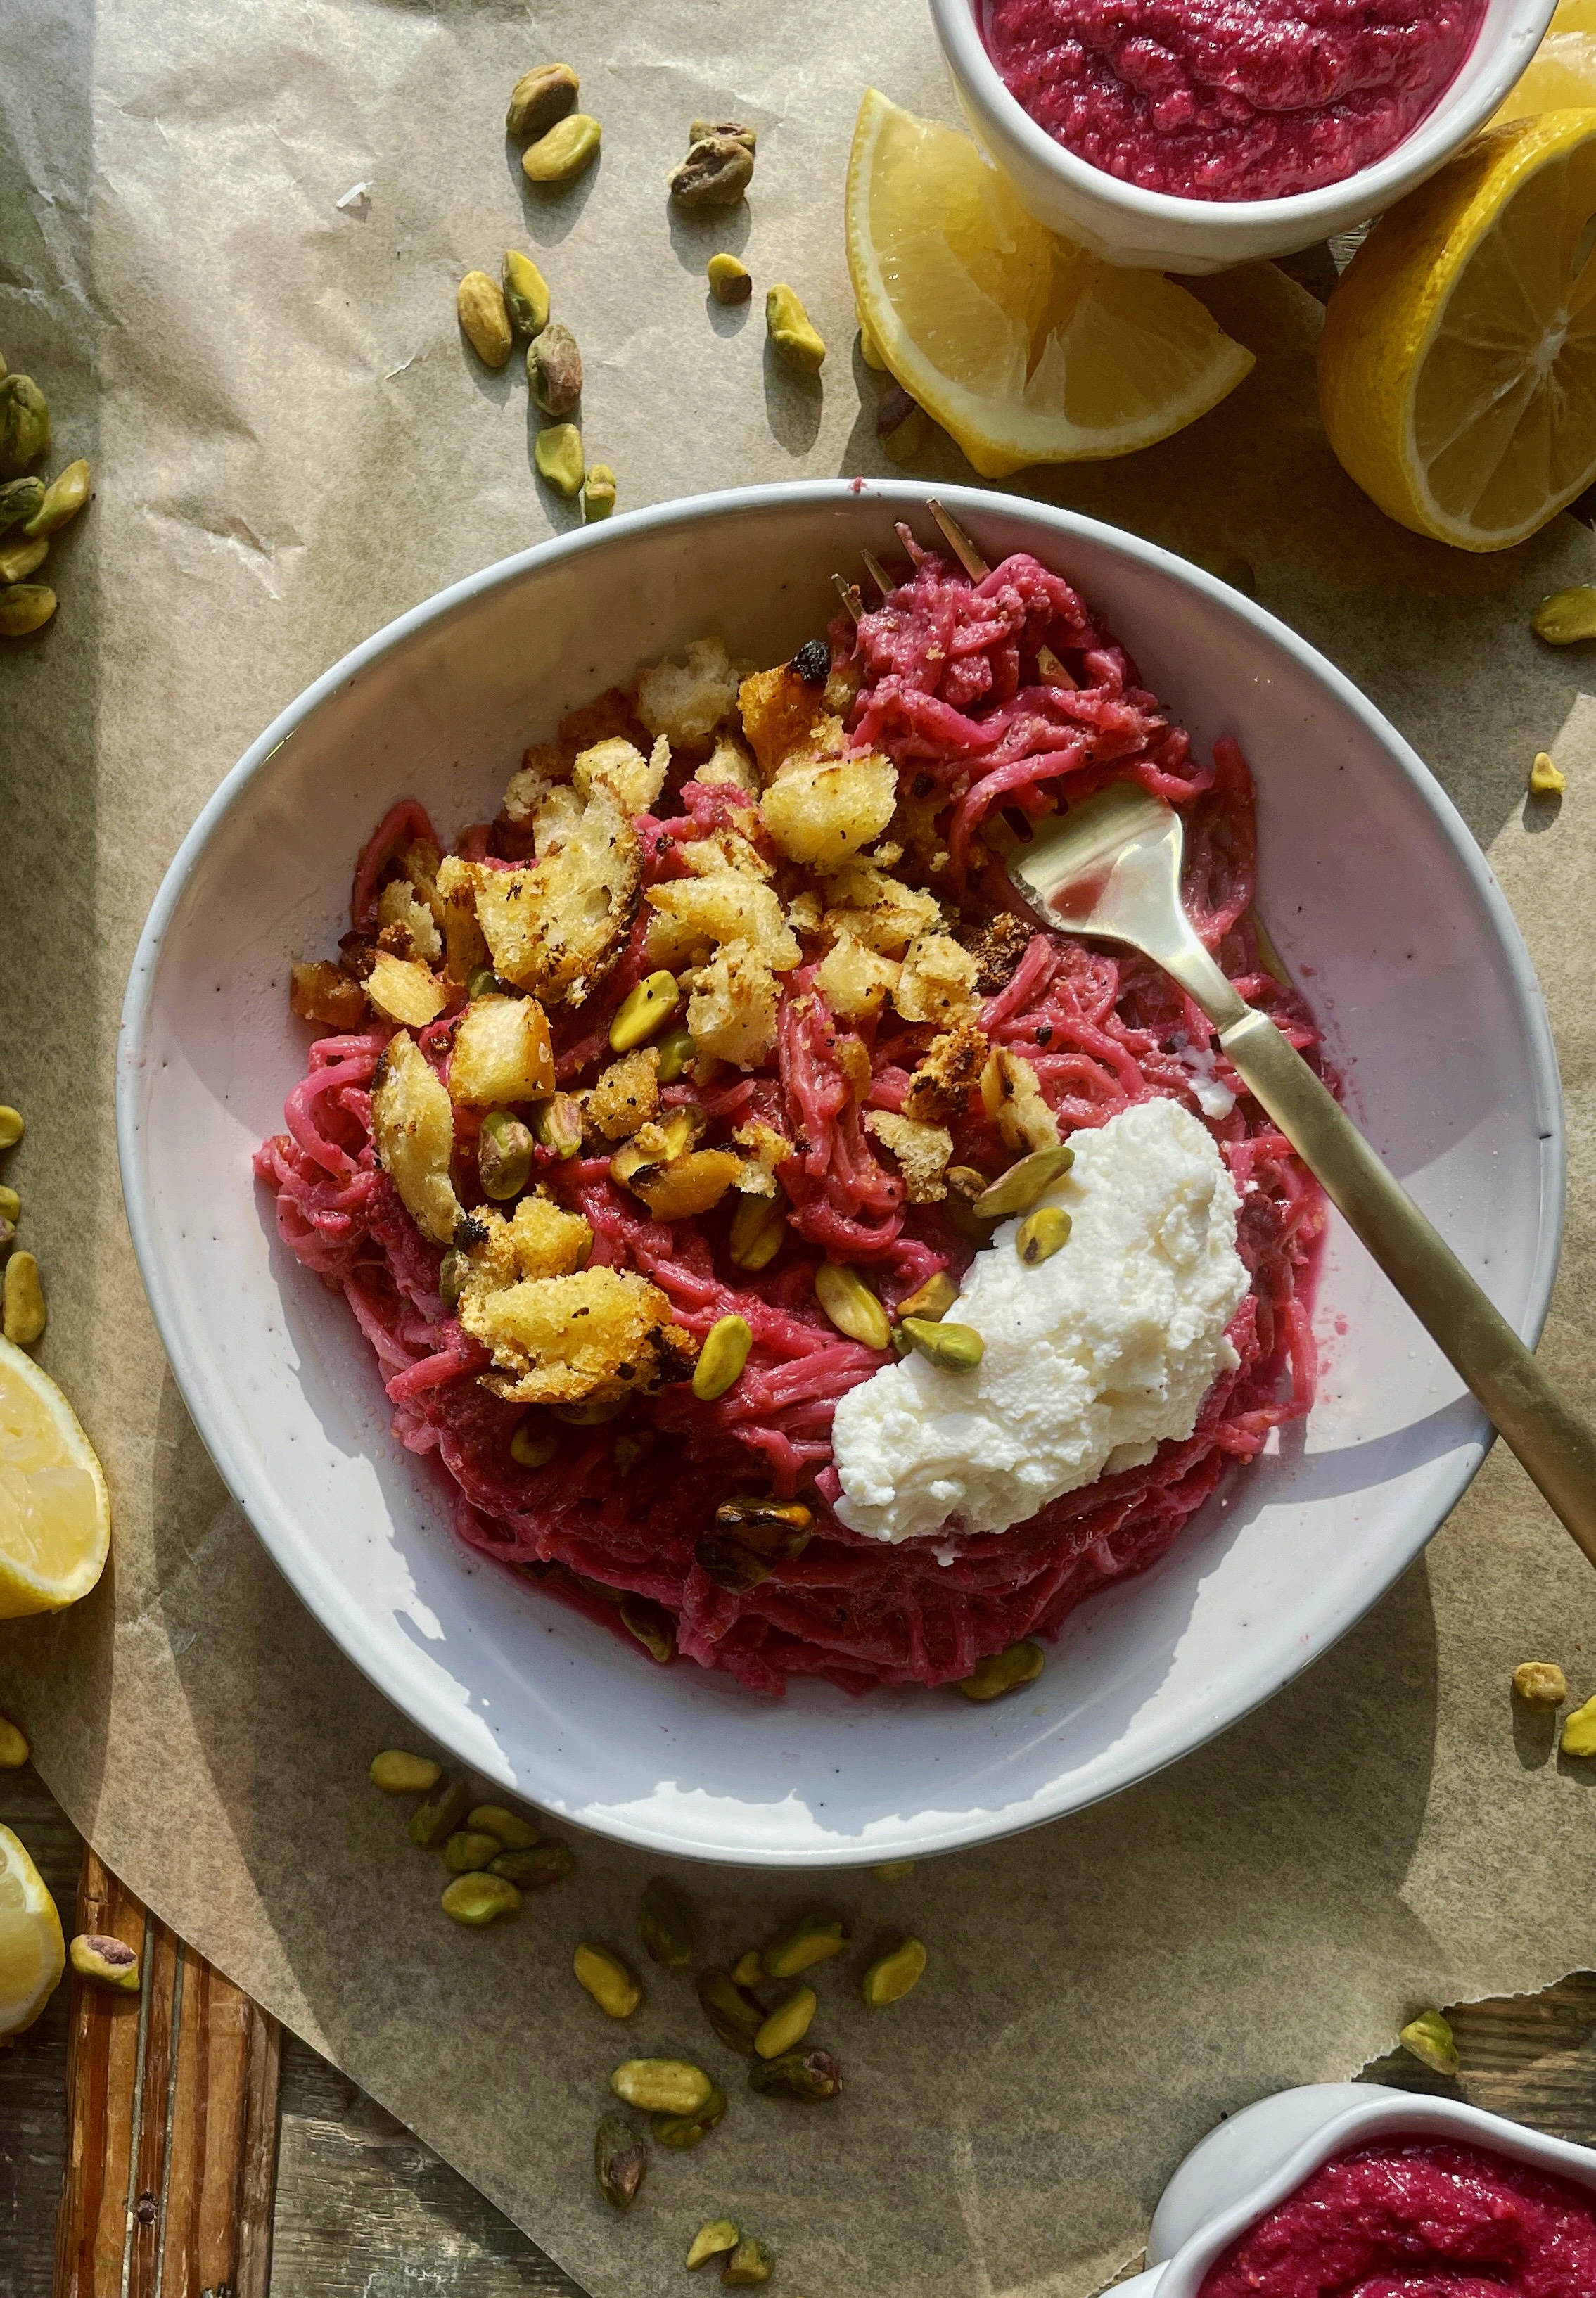  A creamy bright pistachio parmesan beet pesto tossed in a big bowl of noodles and topped with crispy homemade breadcrumbs and a dollop of fresh ricotta: this Beet Pesto Linguine with Ricotta and Homemade Breadcrumbs is truly my newest obsession.